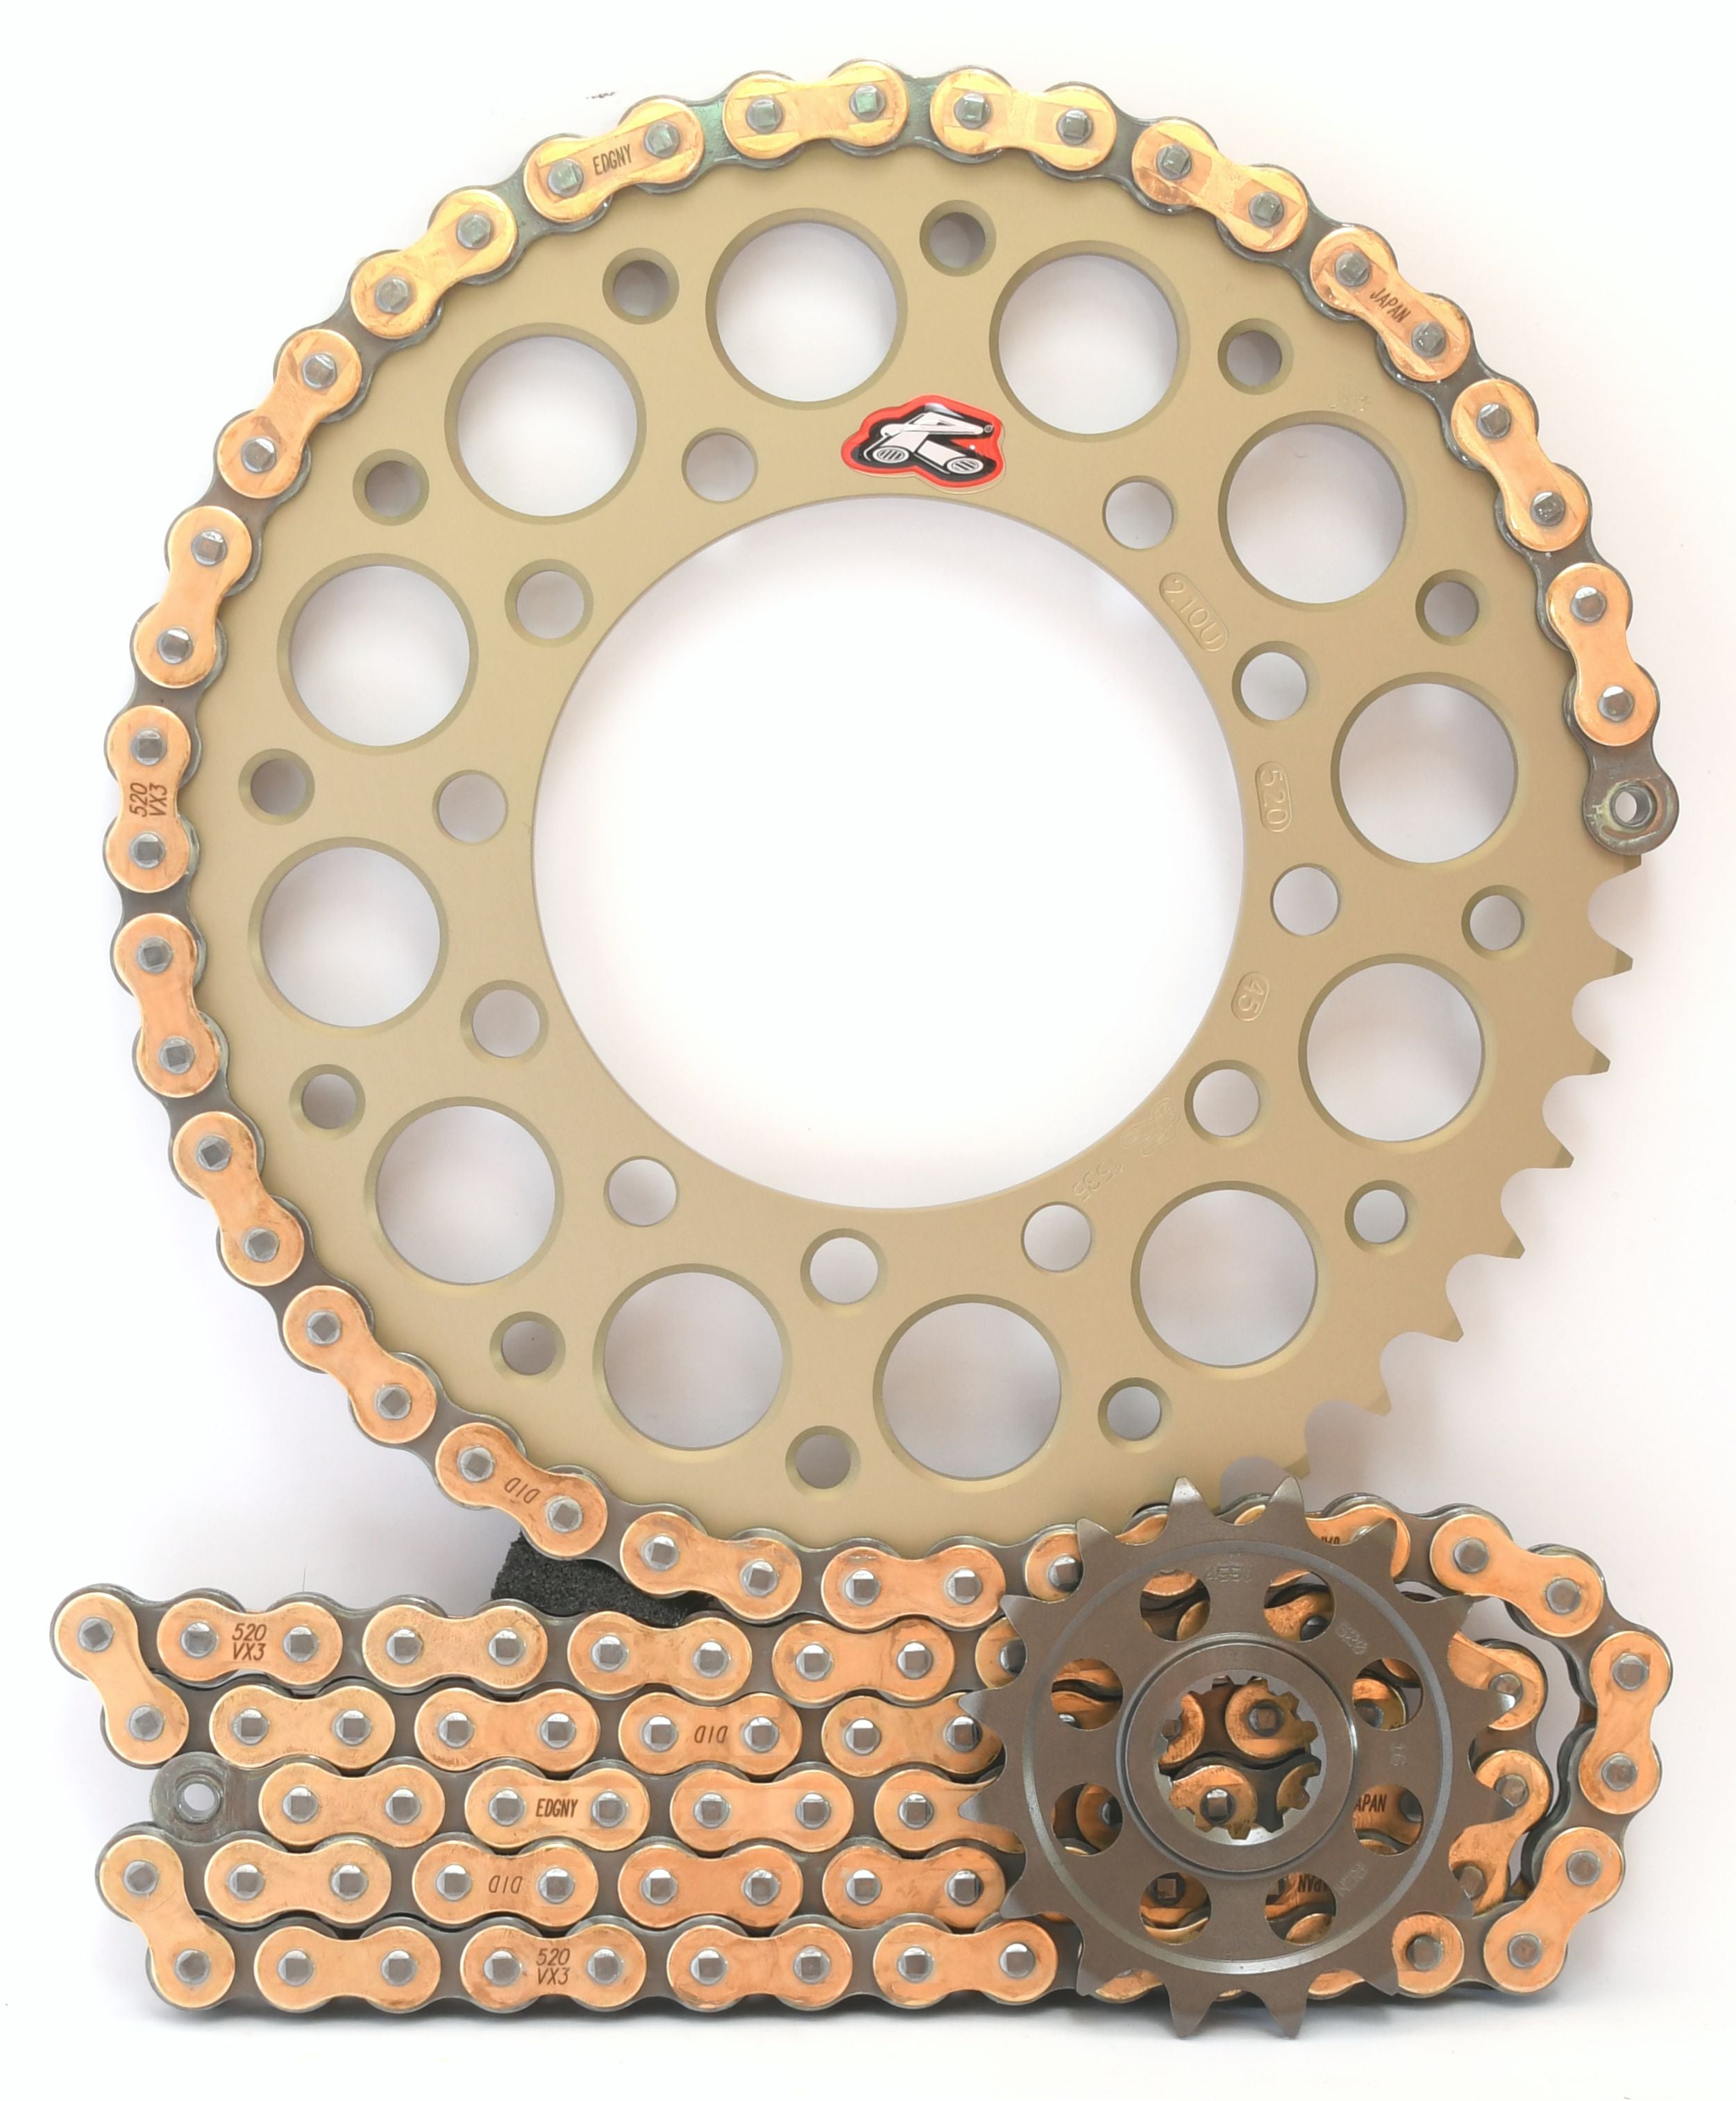 Renthal Ultralight and DID Chain & Sprocket Kit for Kawasaki ZX6R 2019> - Standard Gearing